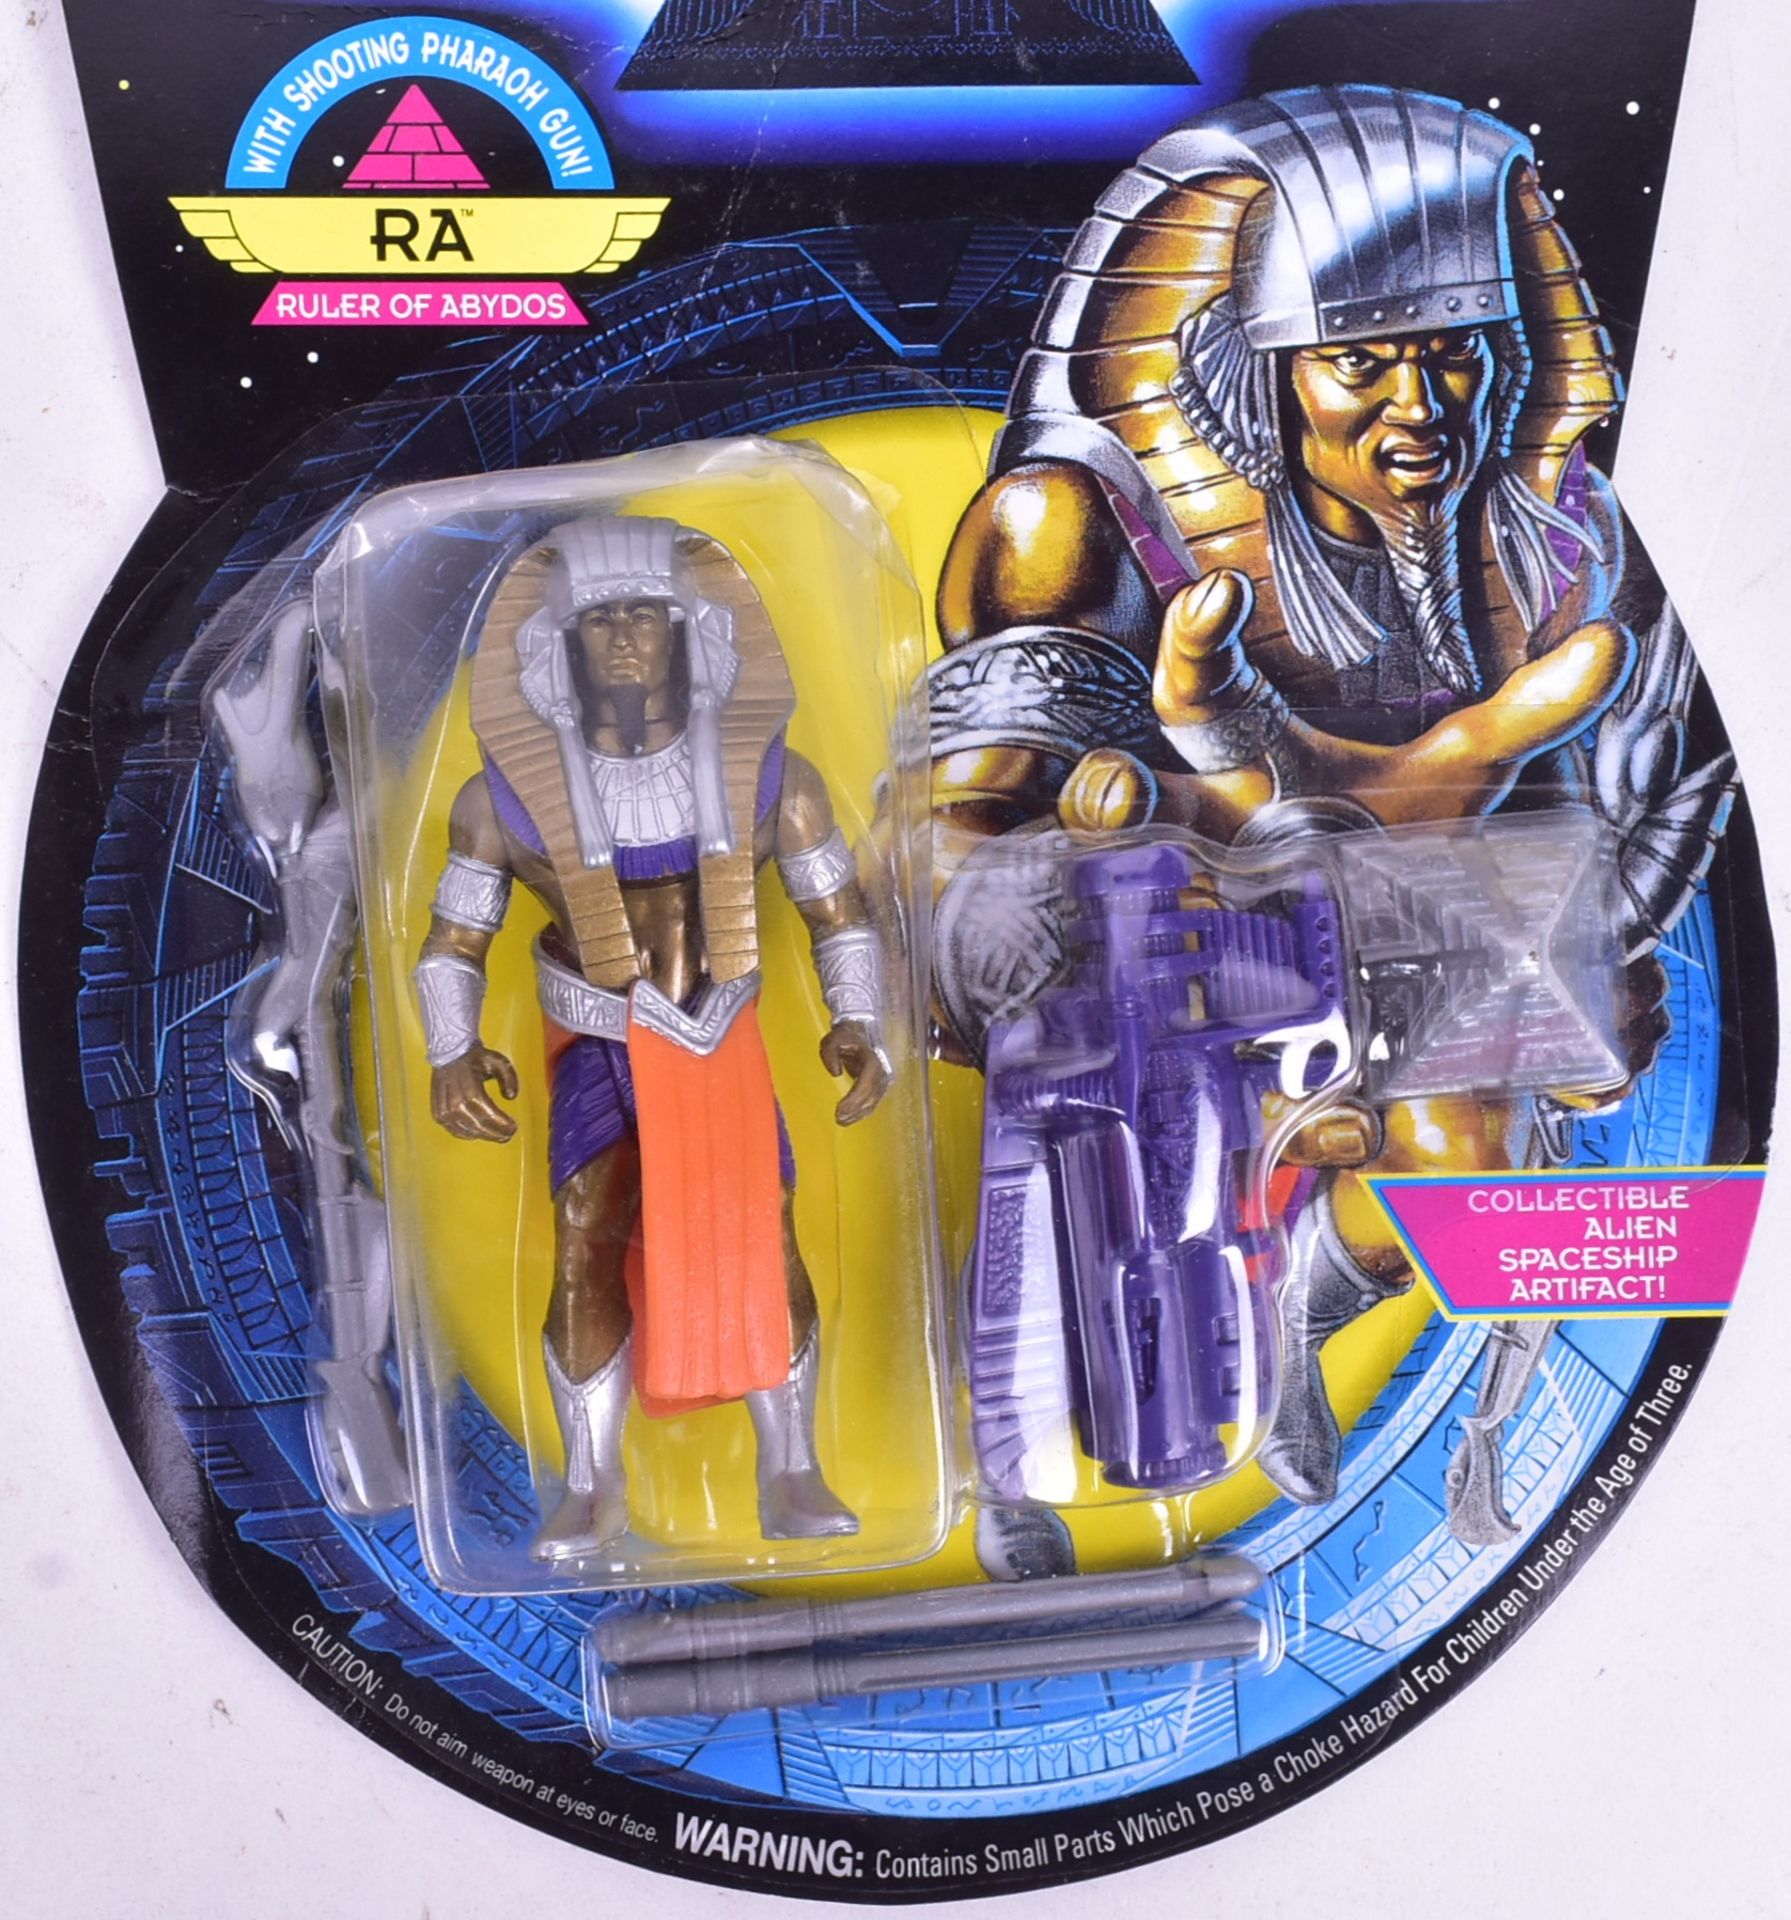 STARGATE - 1994 HASBRO - COLLECTION OF CARDED ACTION FIGURES - Image 2 of 5